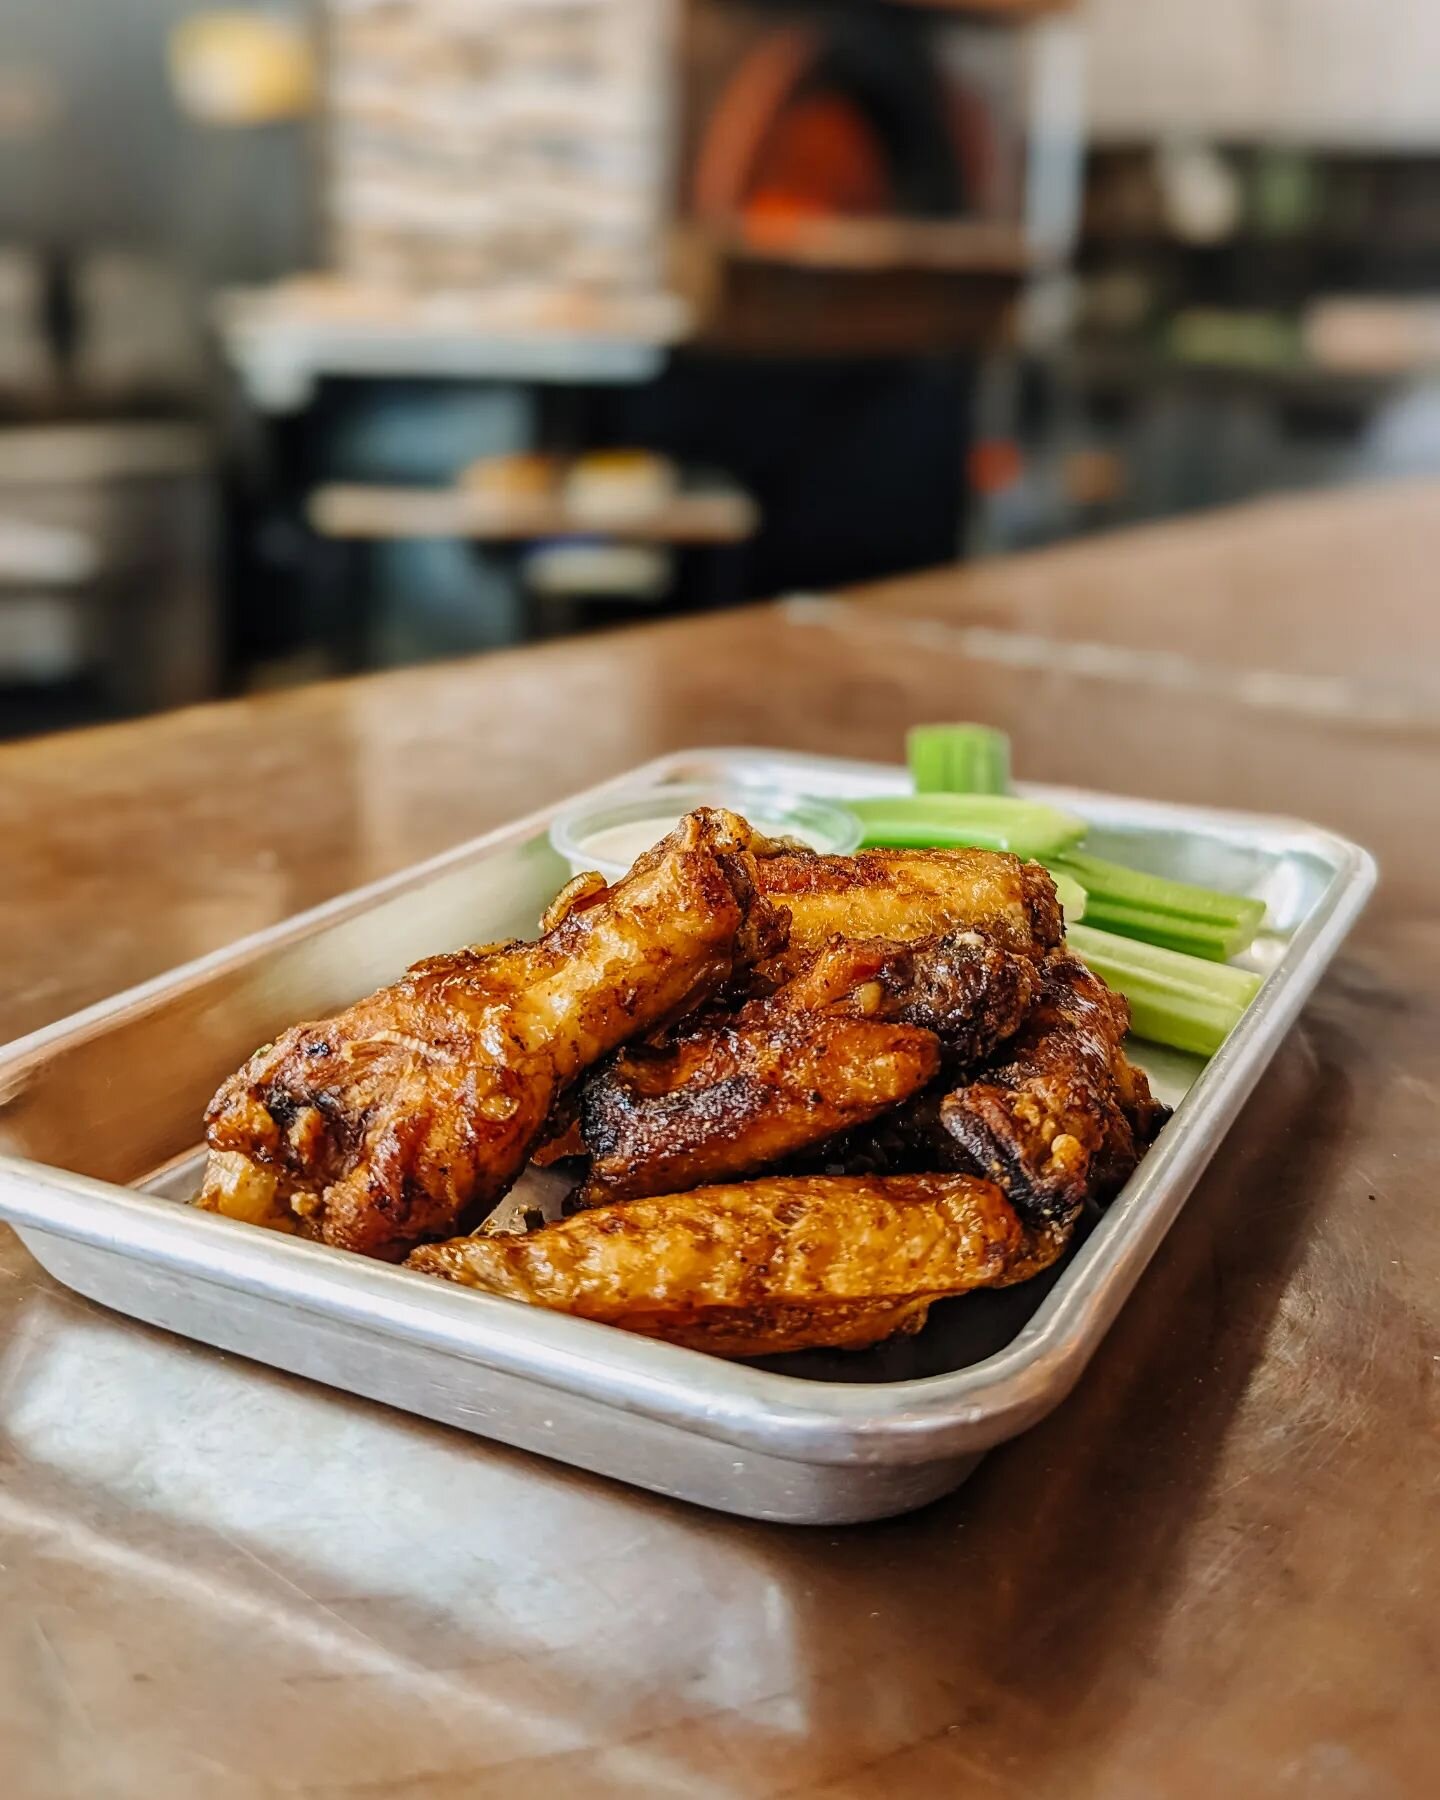 feelin' saucy? try these! 😝
.
.
introducing our summer lineup for 2023

up next ➝🍋 lemon pepper wings
citrusy, tangy &amp; a little peppery with a smidge of honey to balance it all out. the wing flavor of summer!

☀️our seasonal menu will be availa